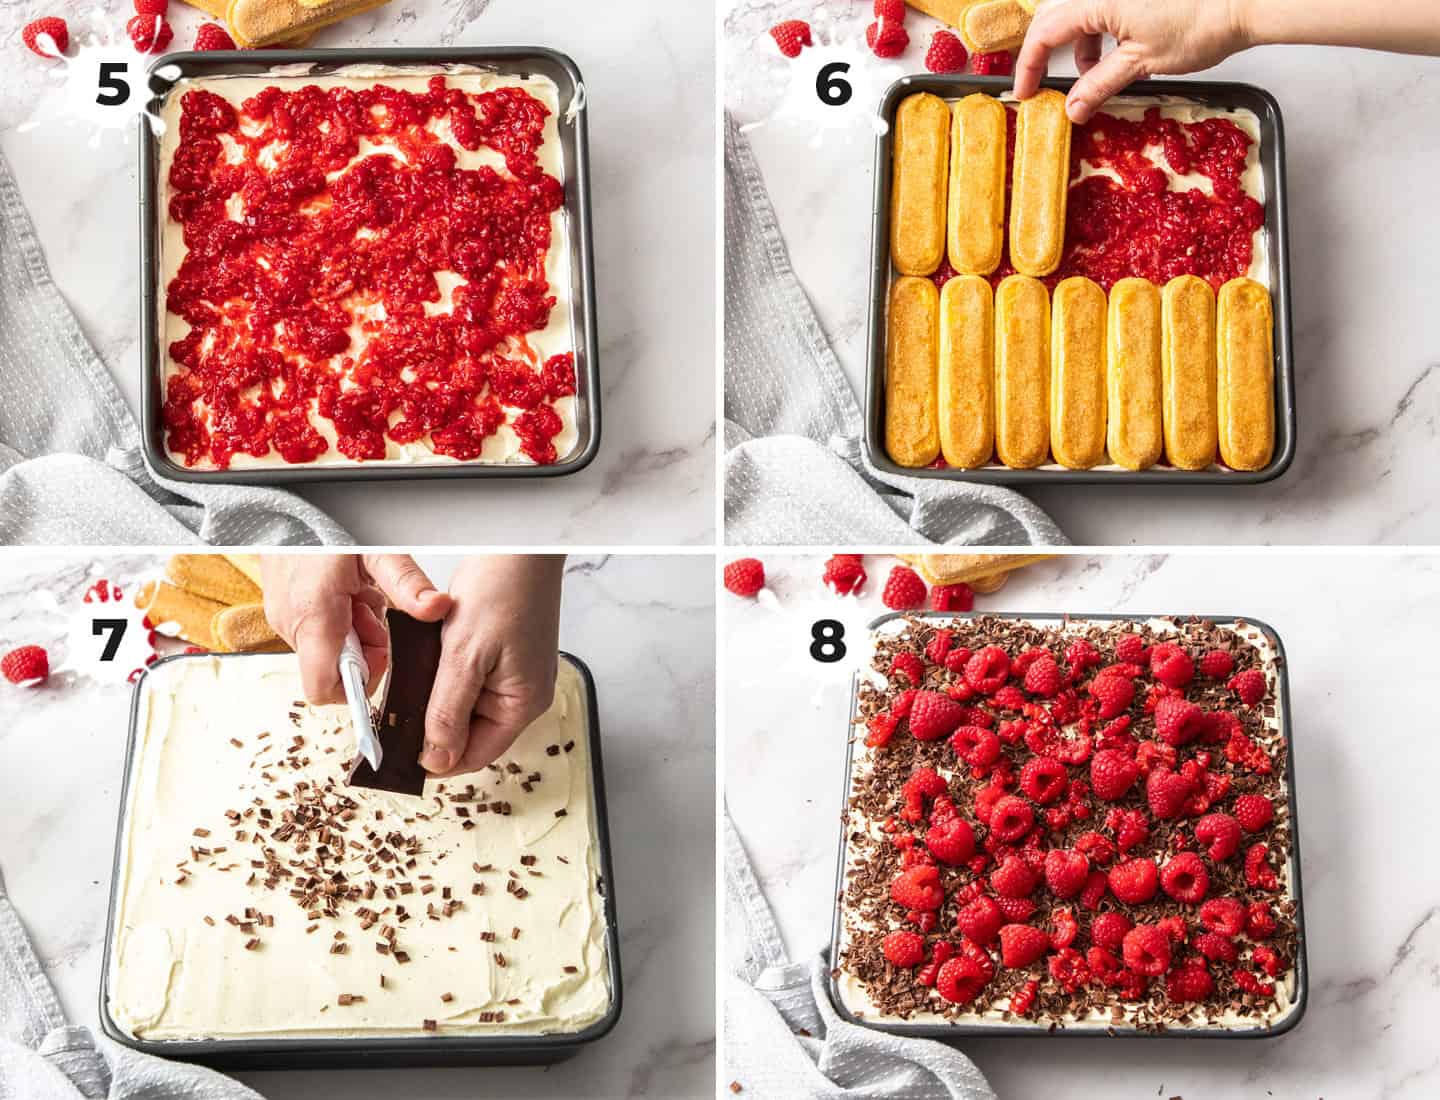 A collage of 4 images showing how to layer a raspberry tiramisu.